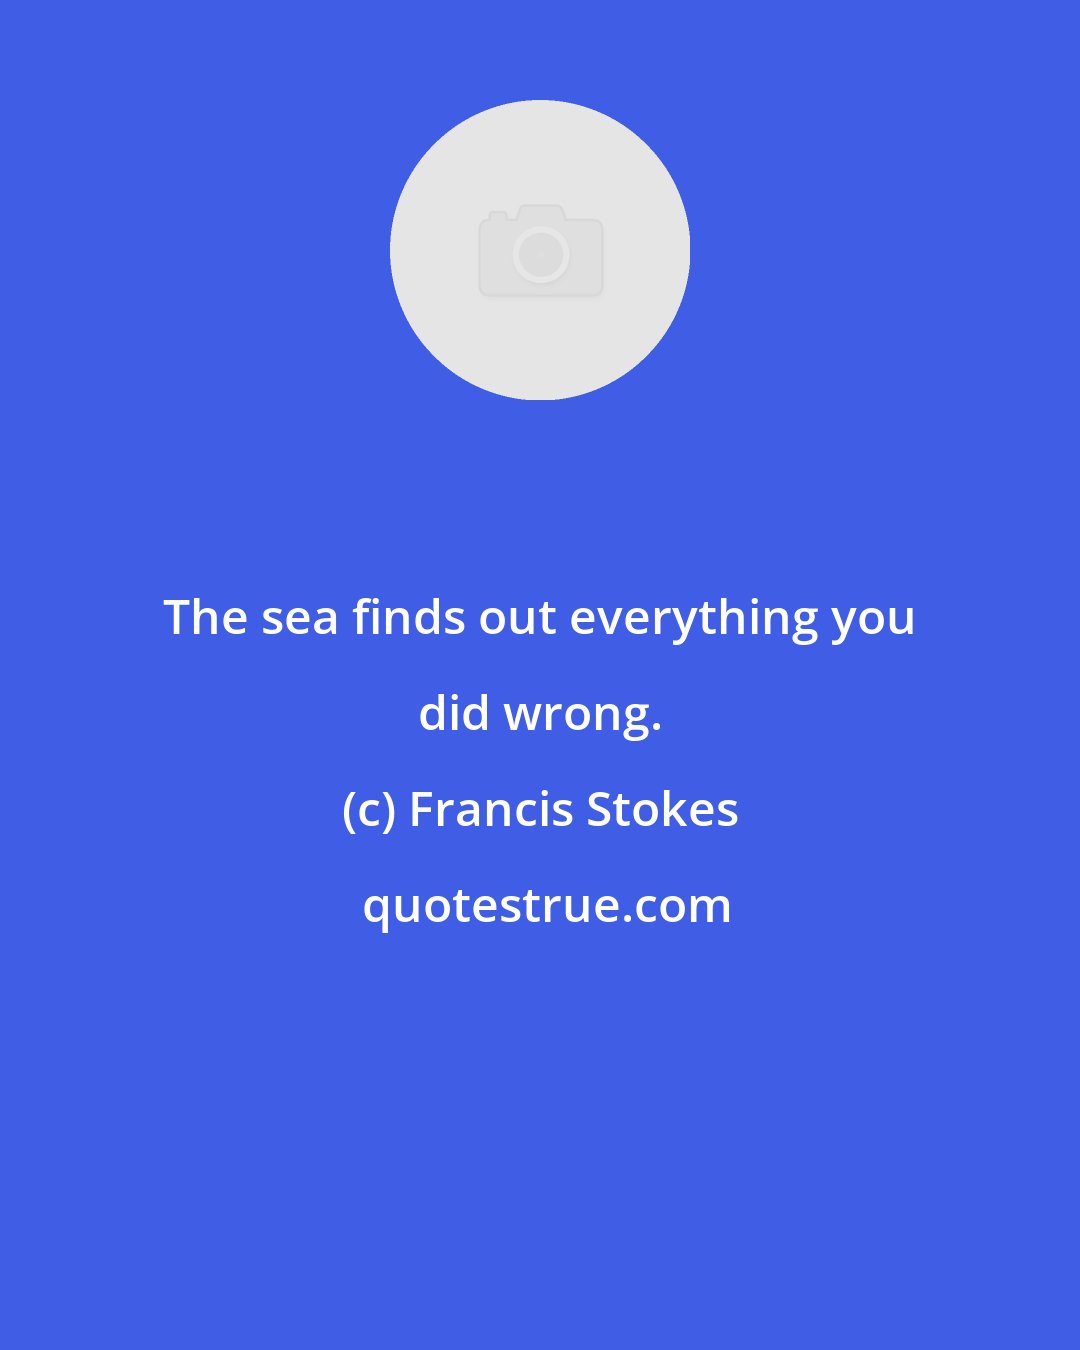 Francis Stokes: The sea finds out everything you did wrong.